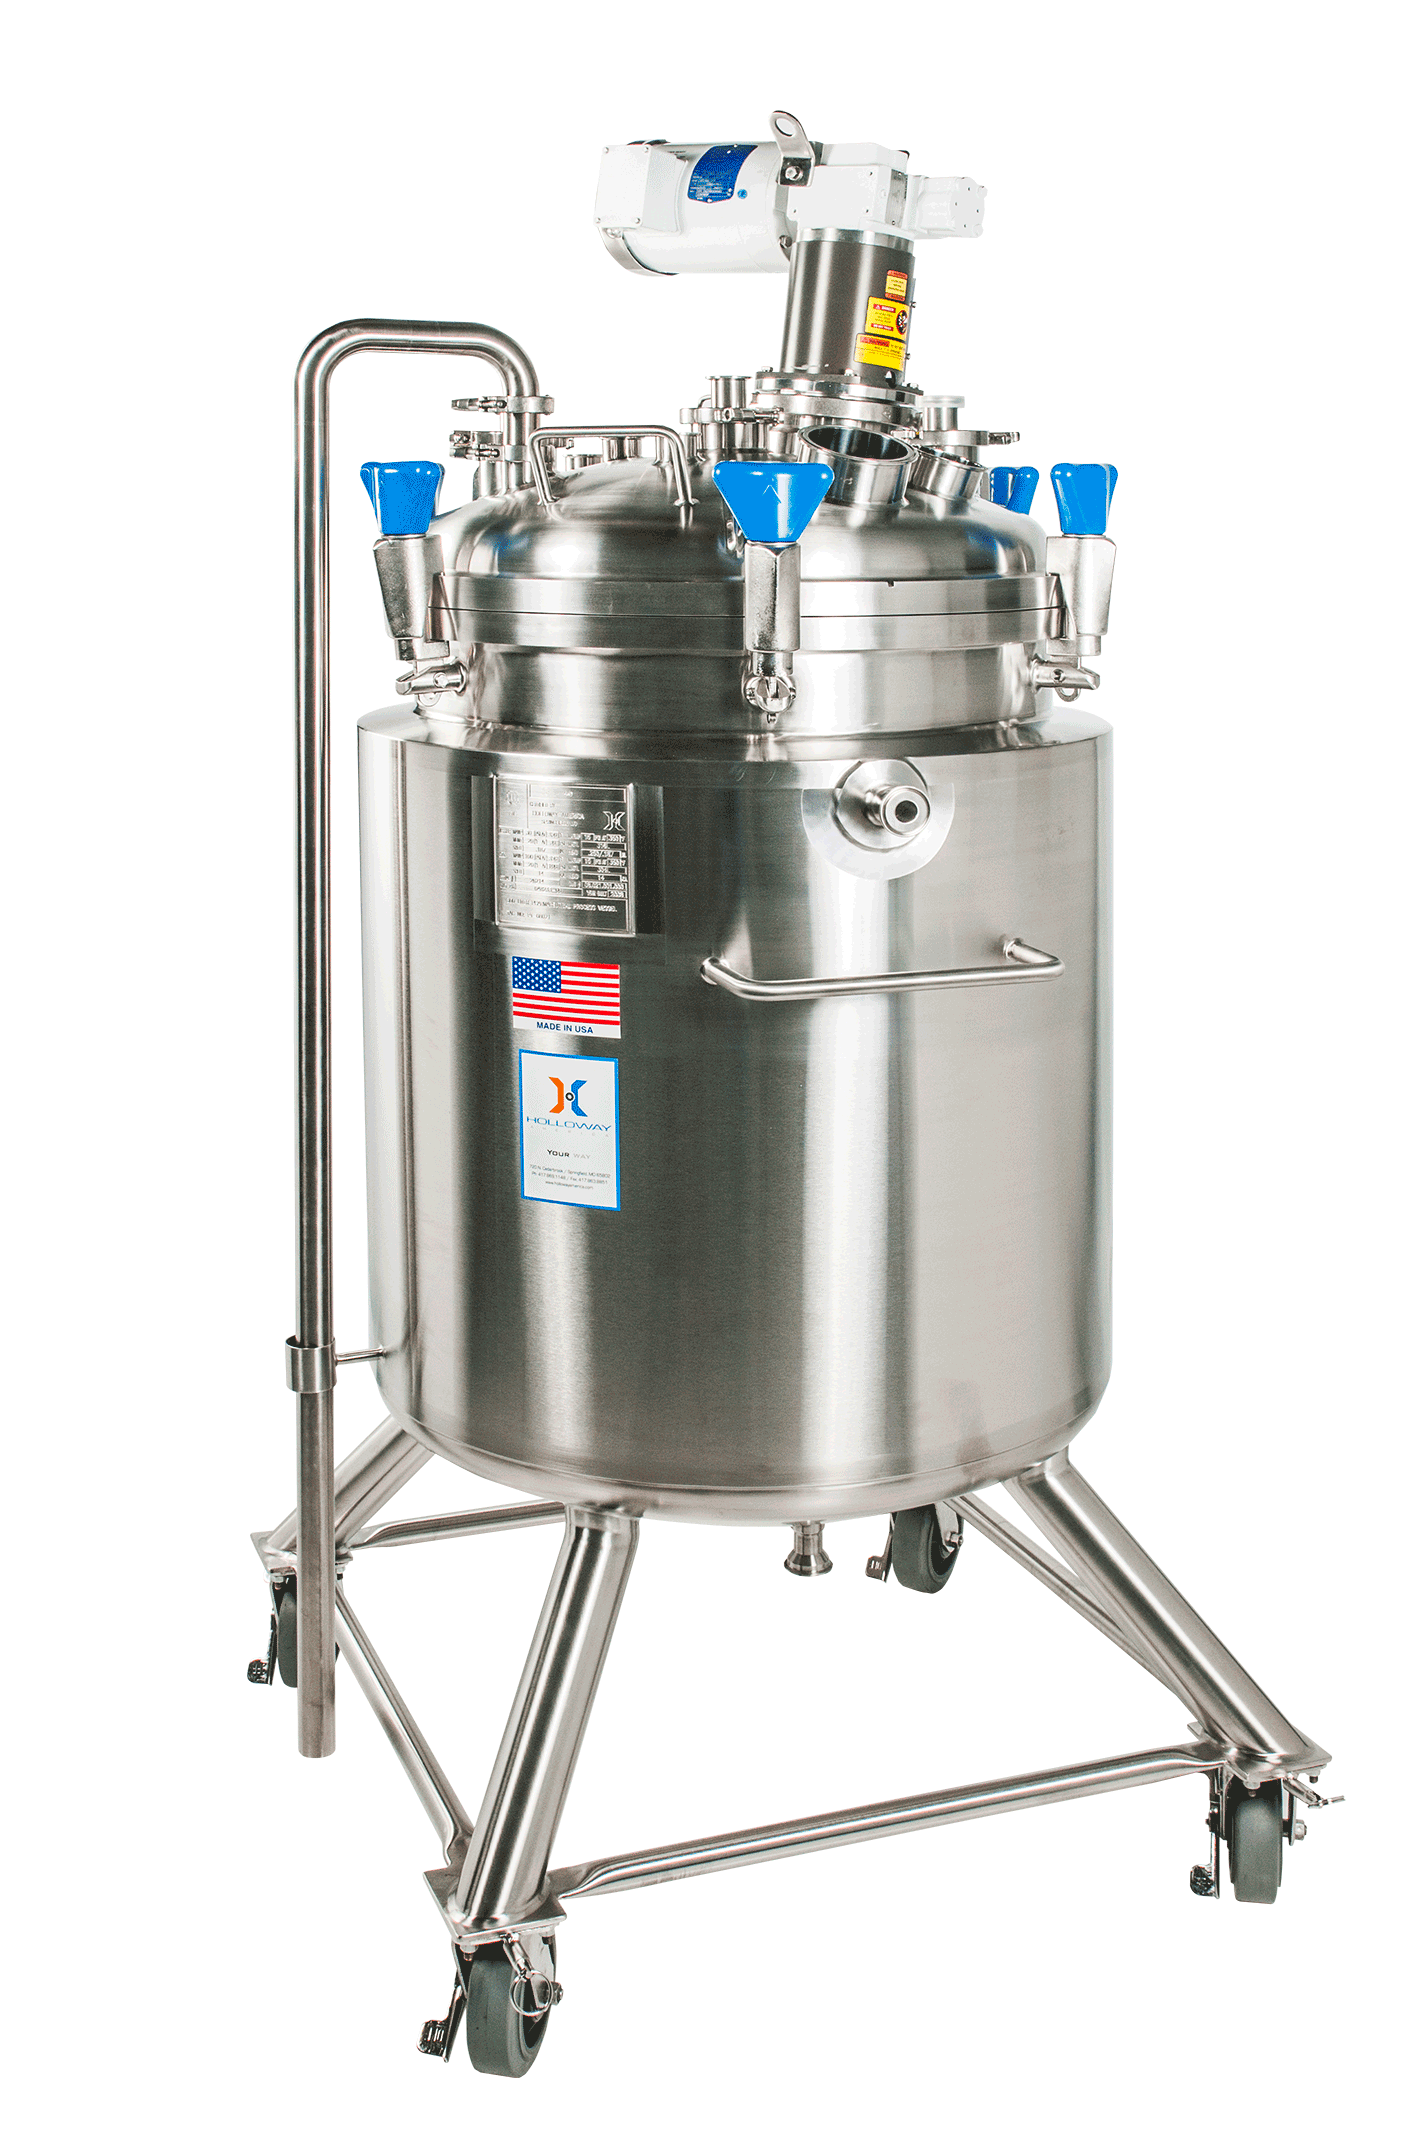 A portable laboratory pressure vessel, like this vertical vessel, is transportable.